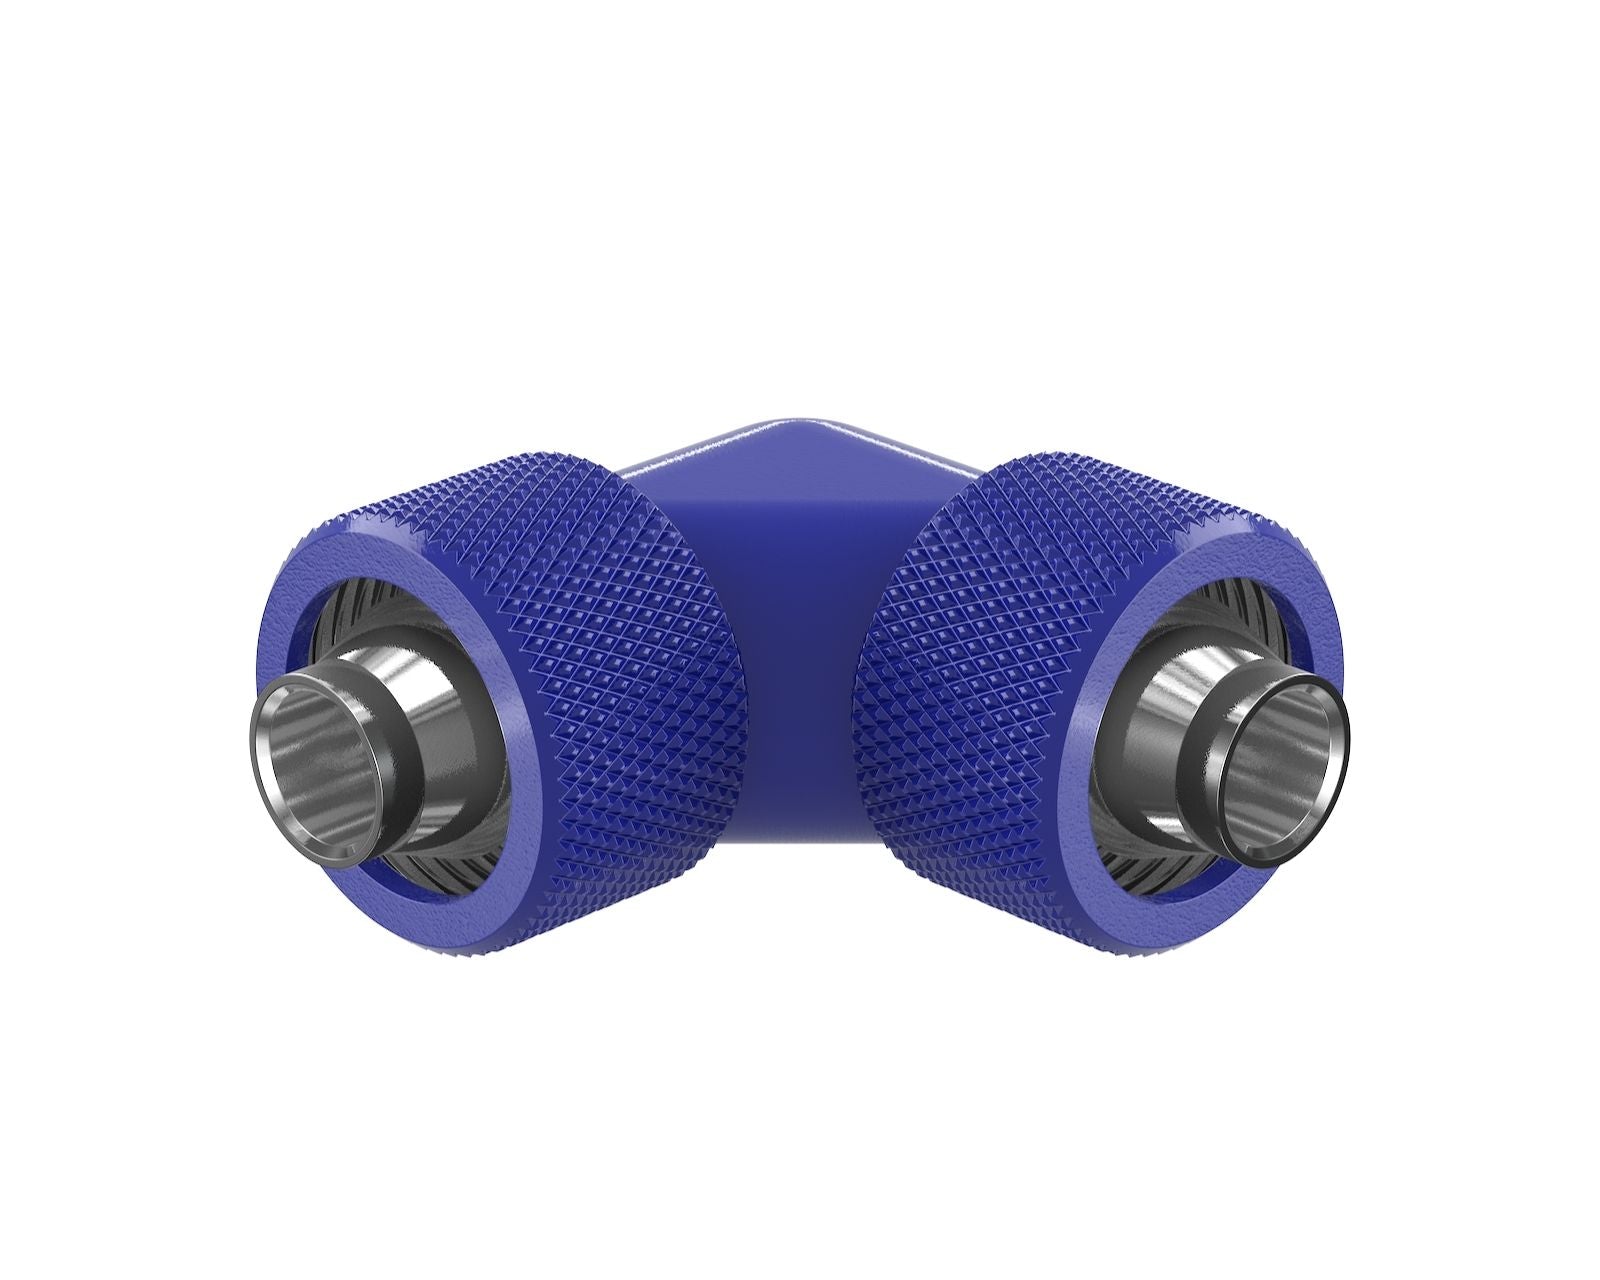 PrimoChill SecureFit SX - Premium 90 Degree Compression Fitting Set For 3/8in ID x 5/8in OD Flexible Tubing (F-SFSX5890) - Available in 20+ Colors, Custom Watercooling Loop Ready - True Blue